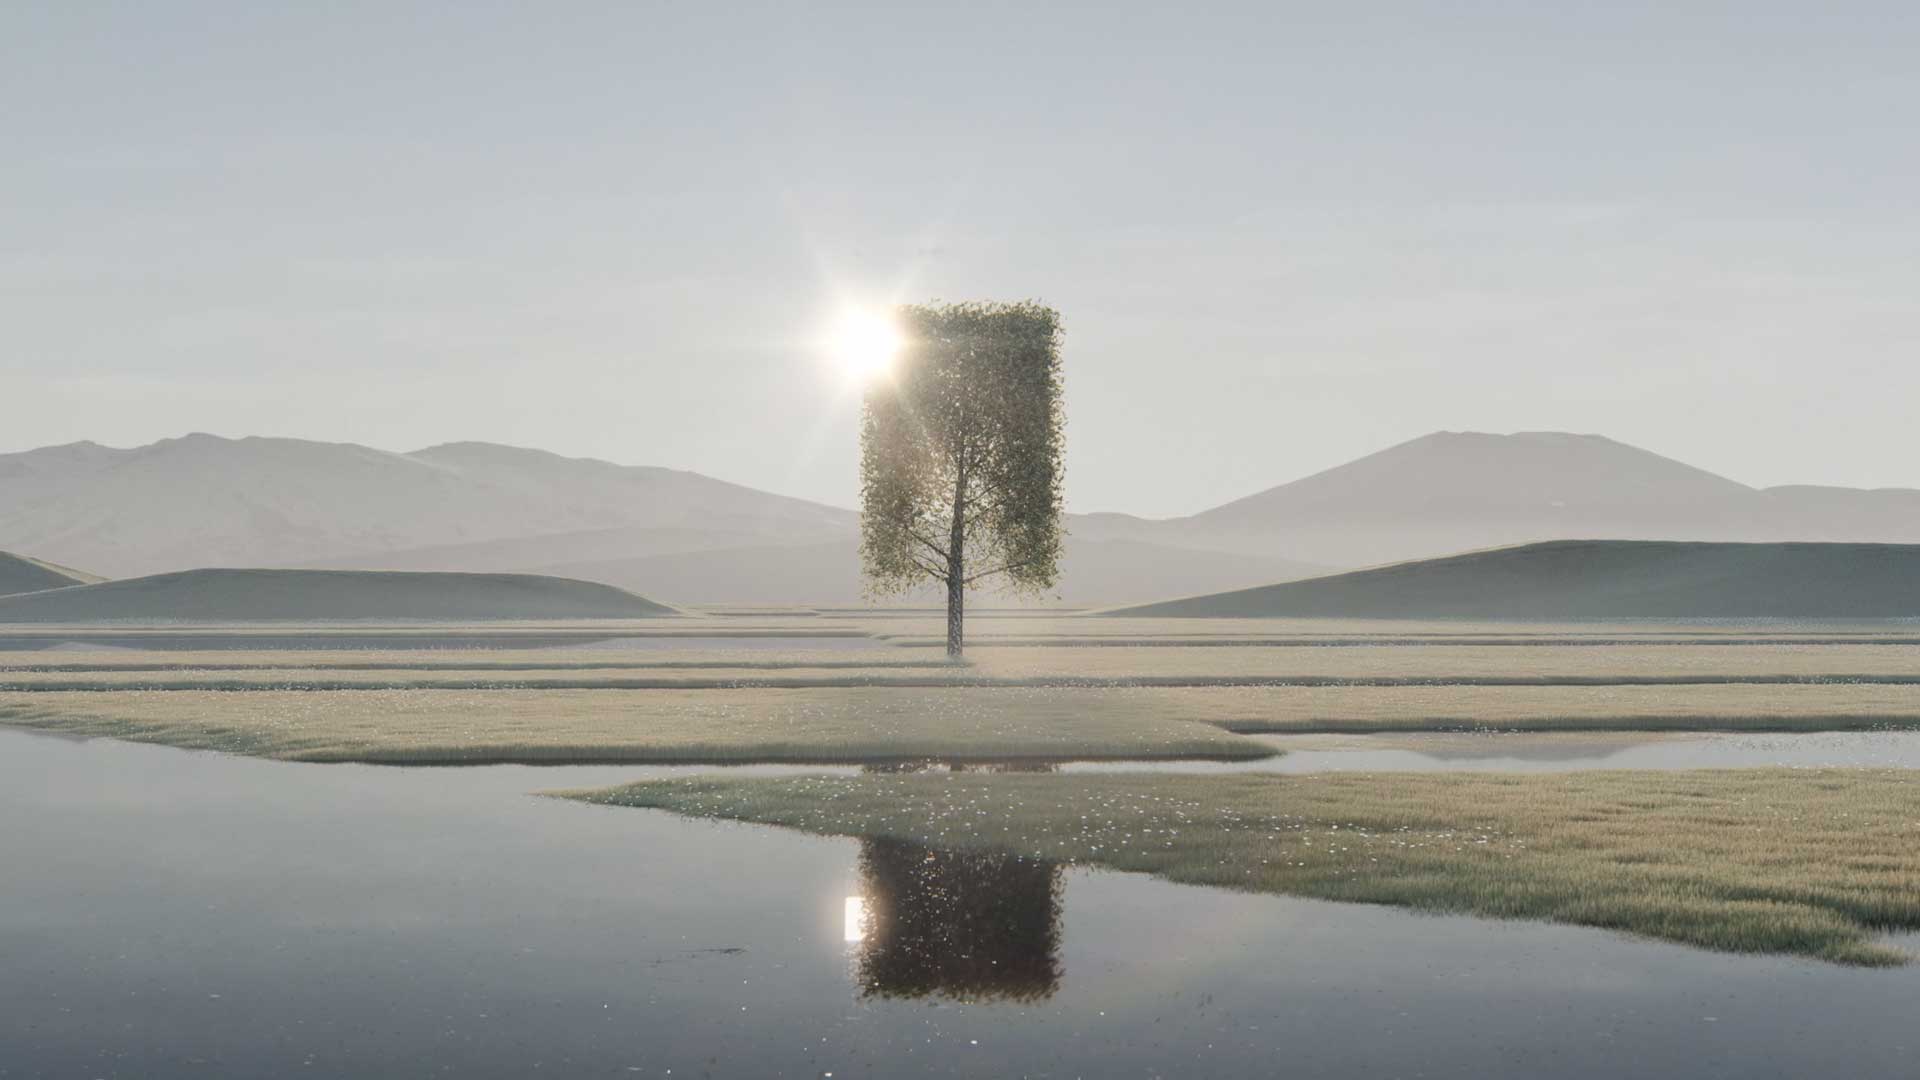 Six N. Five Squares Up to Nature in “Species” Short Film – Motion design [Video]